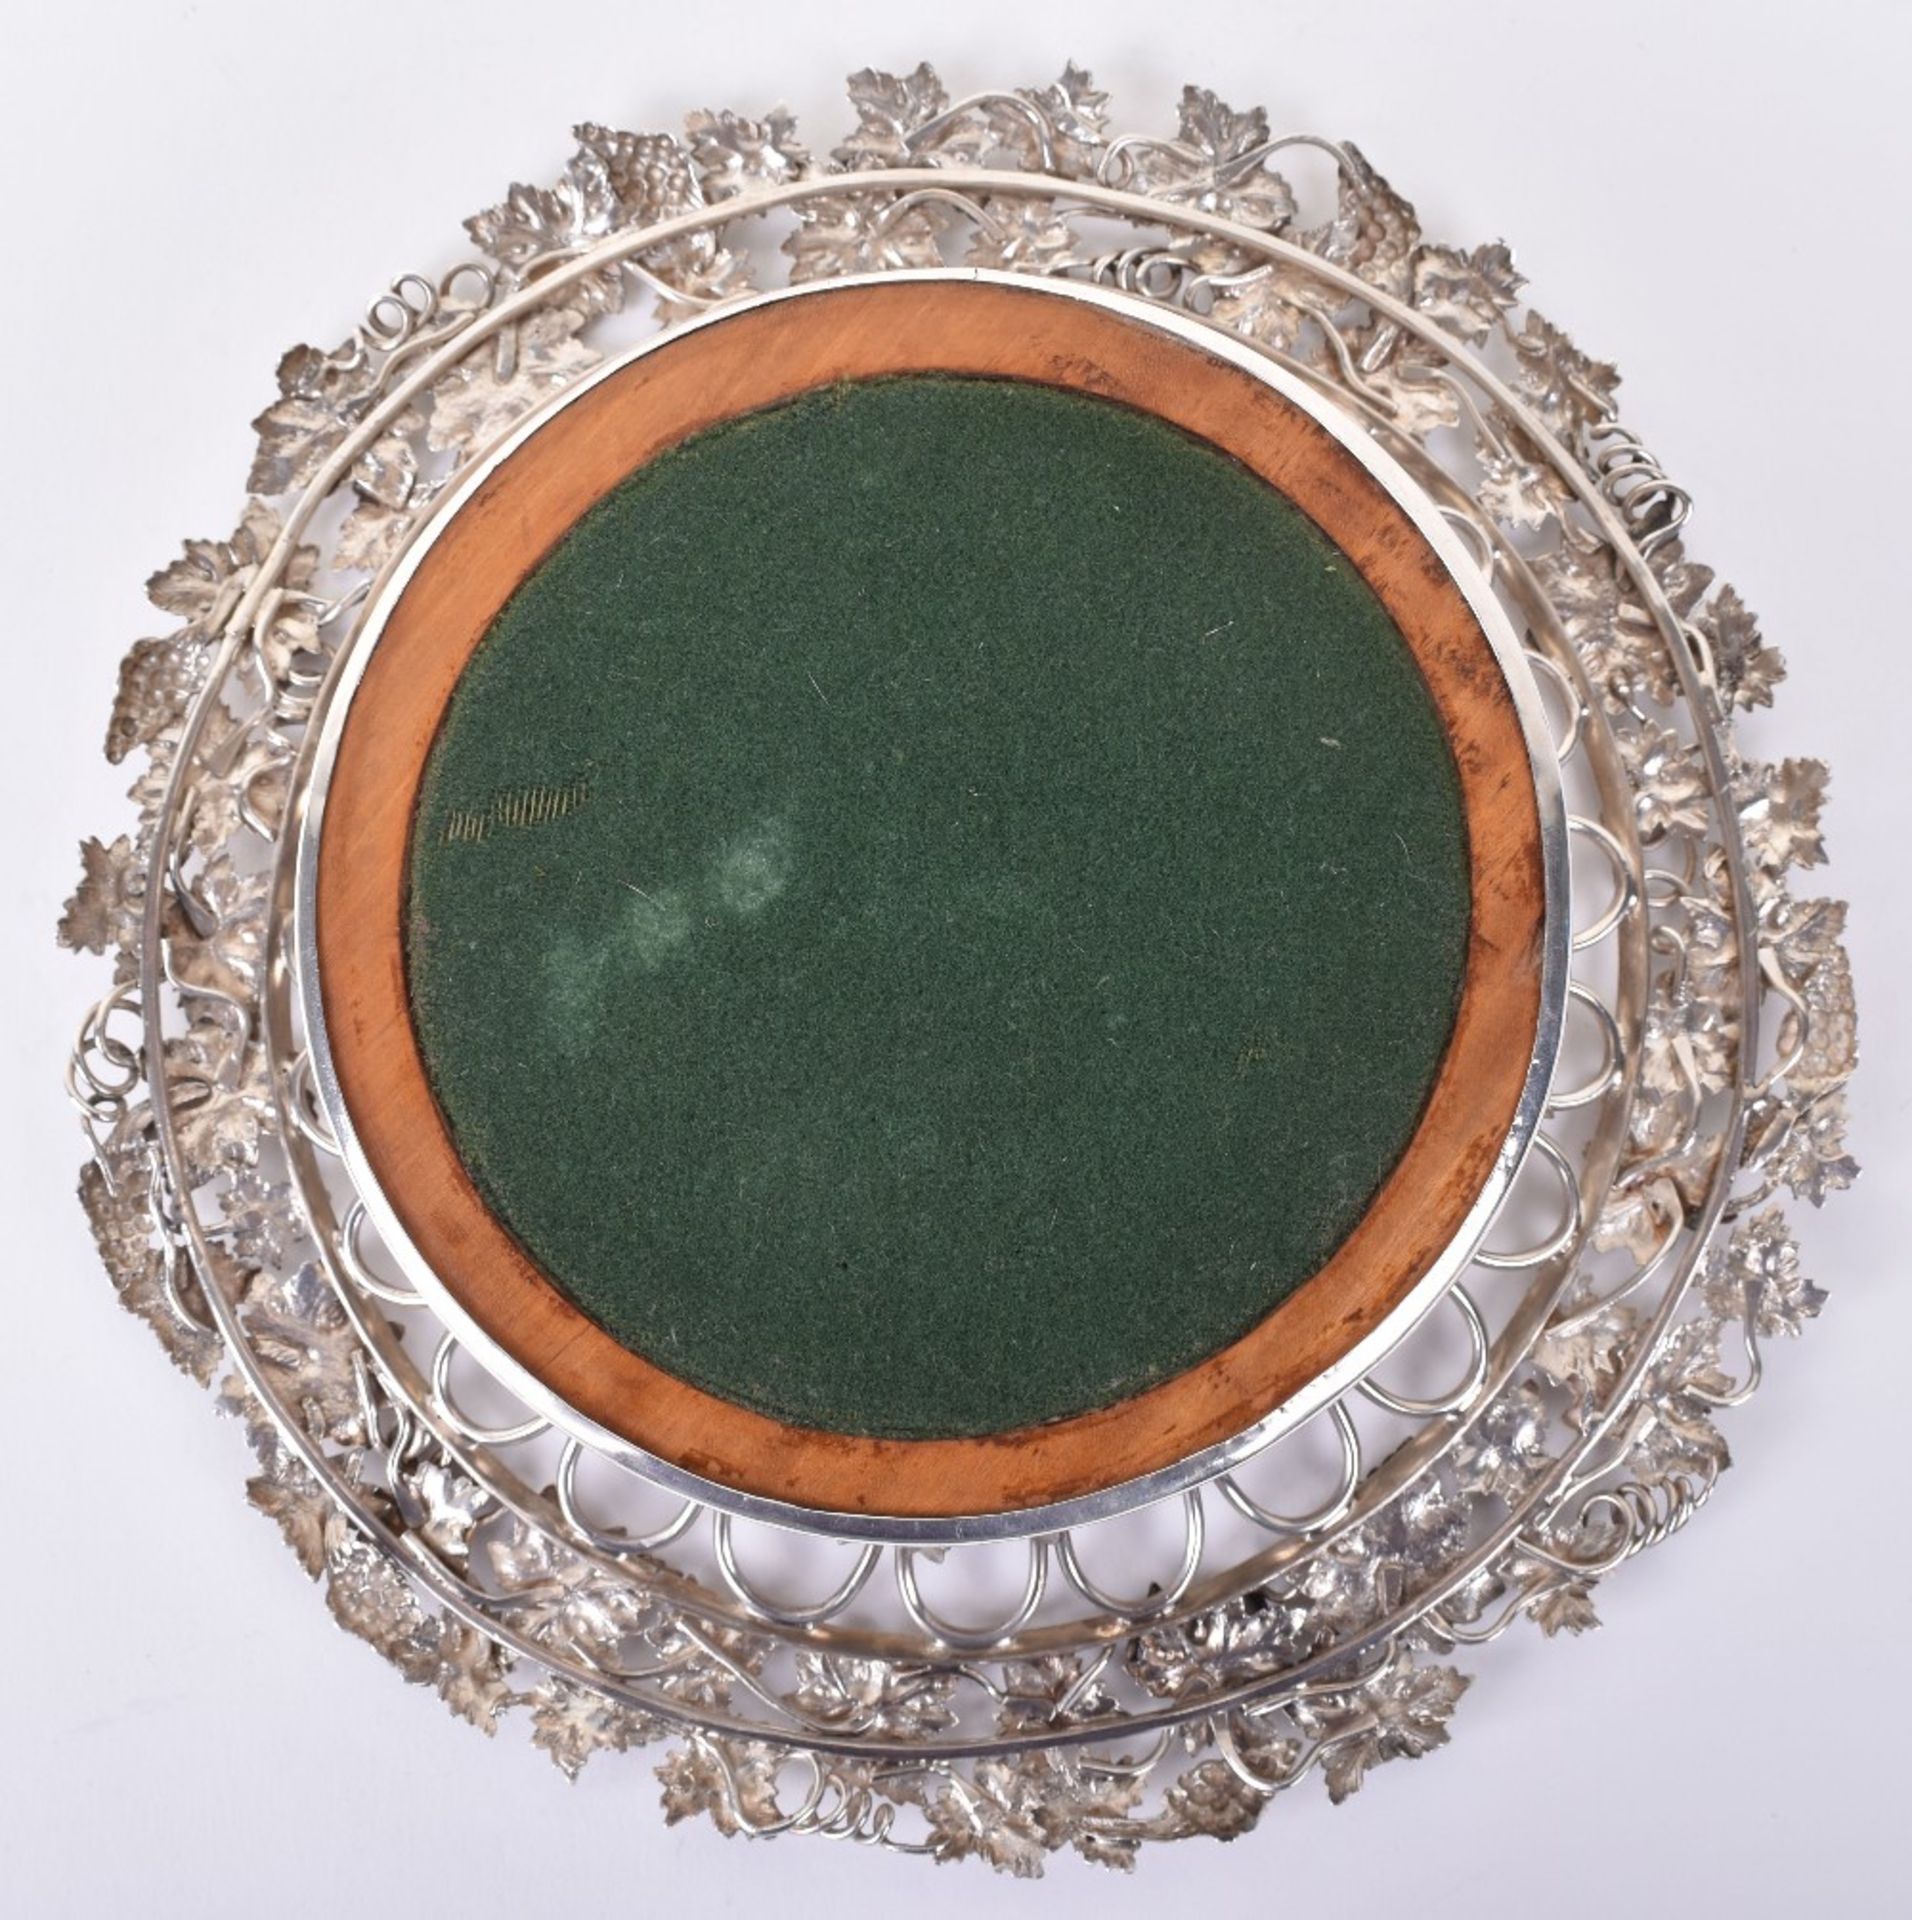 An early Victorian silver wine coaster, by John Terry, London 1844 - Image 5 of 6